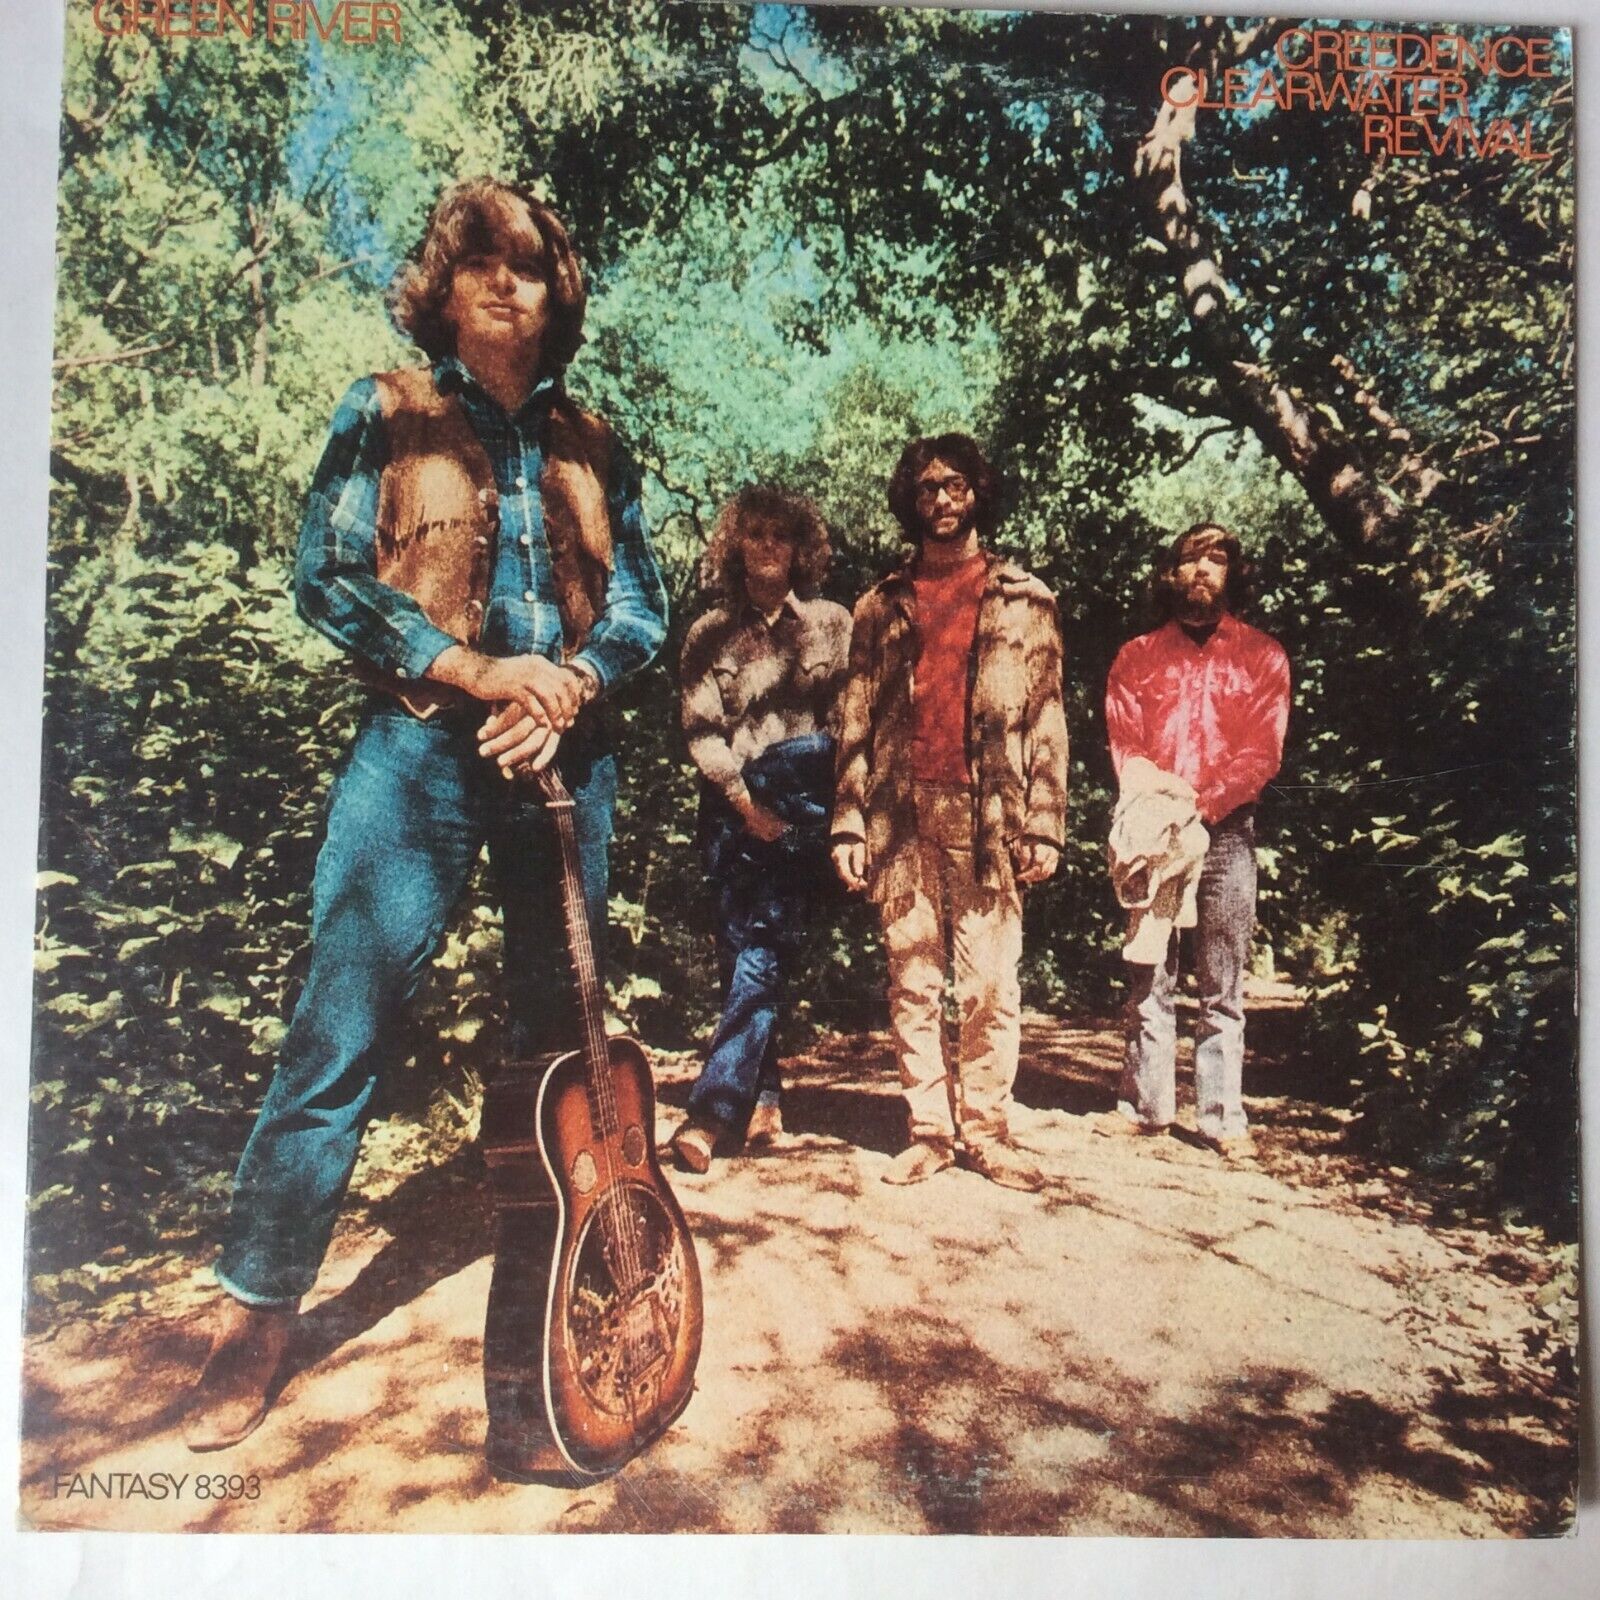 Creedence Clearwater Revival-Green River-Vinyl-Vintage-Collectible-Fantasy 8393